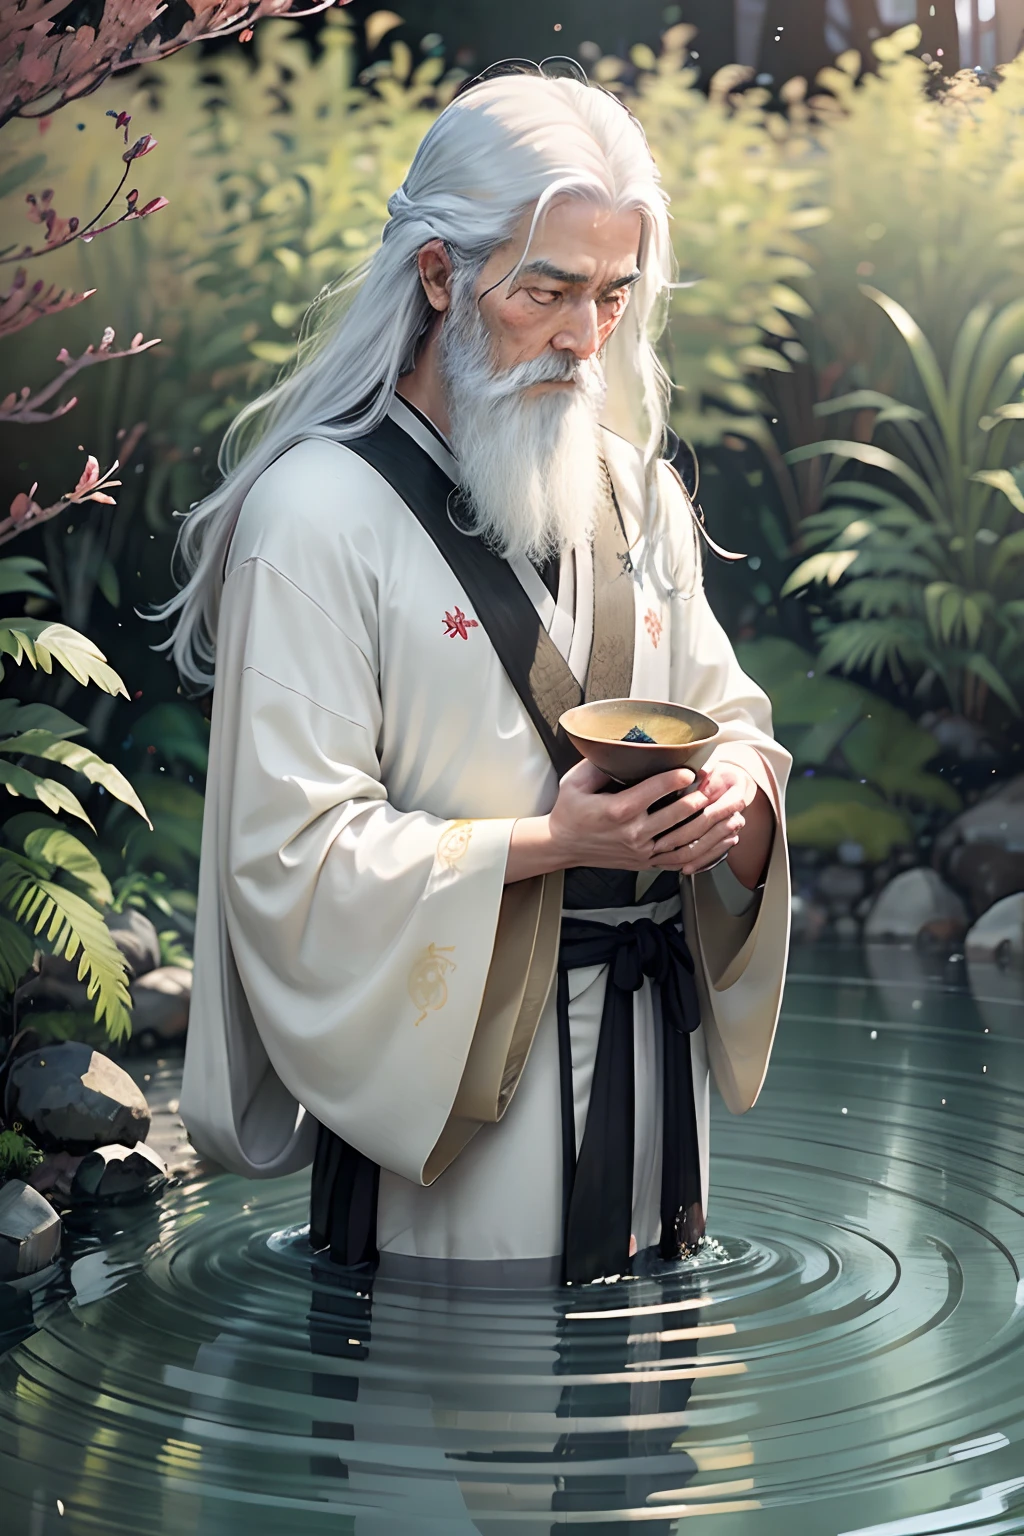 Capture cinematic masterpieces featuring ancient Japanese sages at 8K frames. The sage stands in a peaceful Japanese garden, Condensing the wisdom of the years. His long, A flowing white beard and hair poured down gracefully, Embodies the passage of time. **composition:** - Sage is located in front and middle, Bathed in the soft, The warm glow of the setting sun. The cinematic lighting emphasizes the depth of his character and the wisdom engraved in the characters. - His eyes, Deep contemplation, Tell a story full of knowledge and experience for a lifetime. - The saint wears gorgeous clothes, Colorful kimono, Intricate decoration of traditional patterns，Hint at his wisdom and status. - His hand clenched gently, Holding a traditional Japanese staff, A symbol of saints. - Around the Saints, The garden is lush, serenebackground, Meticulously maintained bonsai trees and tranquil koi ponds, Reflecting the beauty of the natural world that he cherished. - 8K resolution reveals the most nuanced differences in his features, From the single strands of his long hair to the intricate embroidery on his kimono. - Cinematic lighting creates game shadows and highlights, Emphasize the presence of the saint and the depth of the scene. - The image captures a quiet moment of contemplation, The saint exudes serenity and a sense of inner peace. This image tip is designed to evoke a deep awe and appreciation for the wisdom and beauty of Japanese culture, Condensed in the personalities of ancient saints.